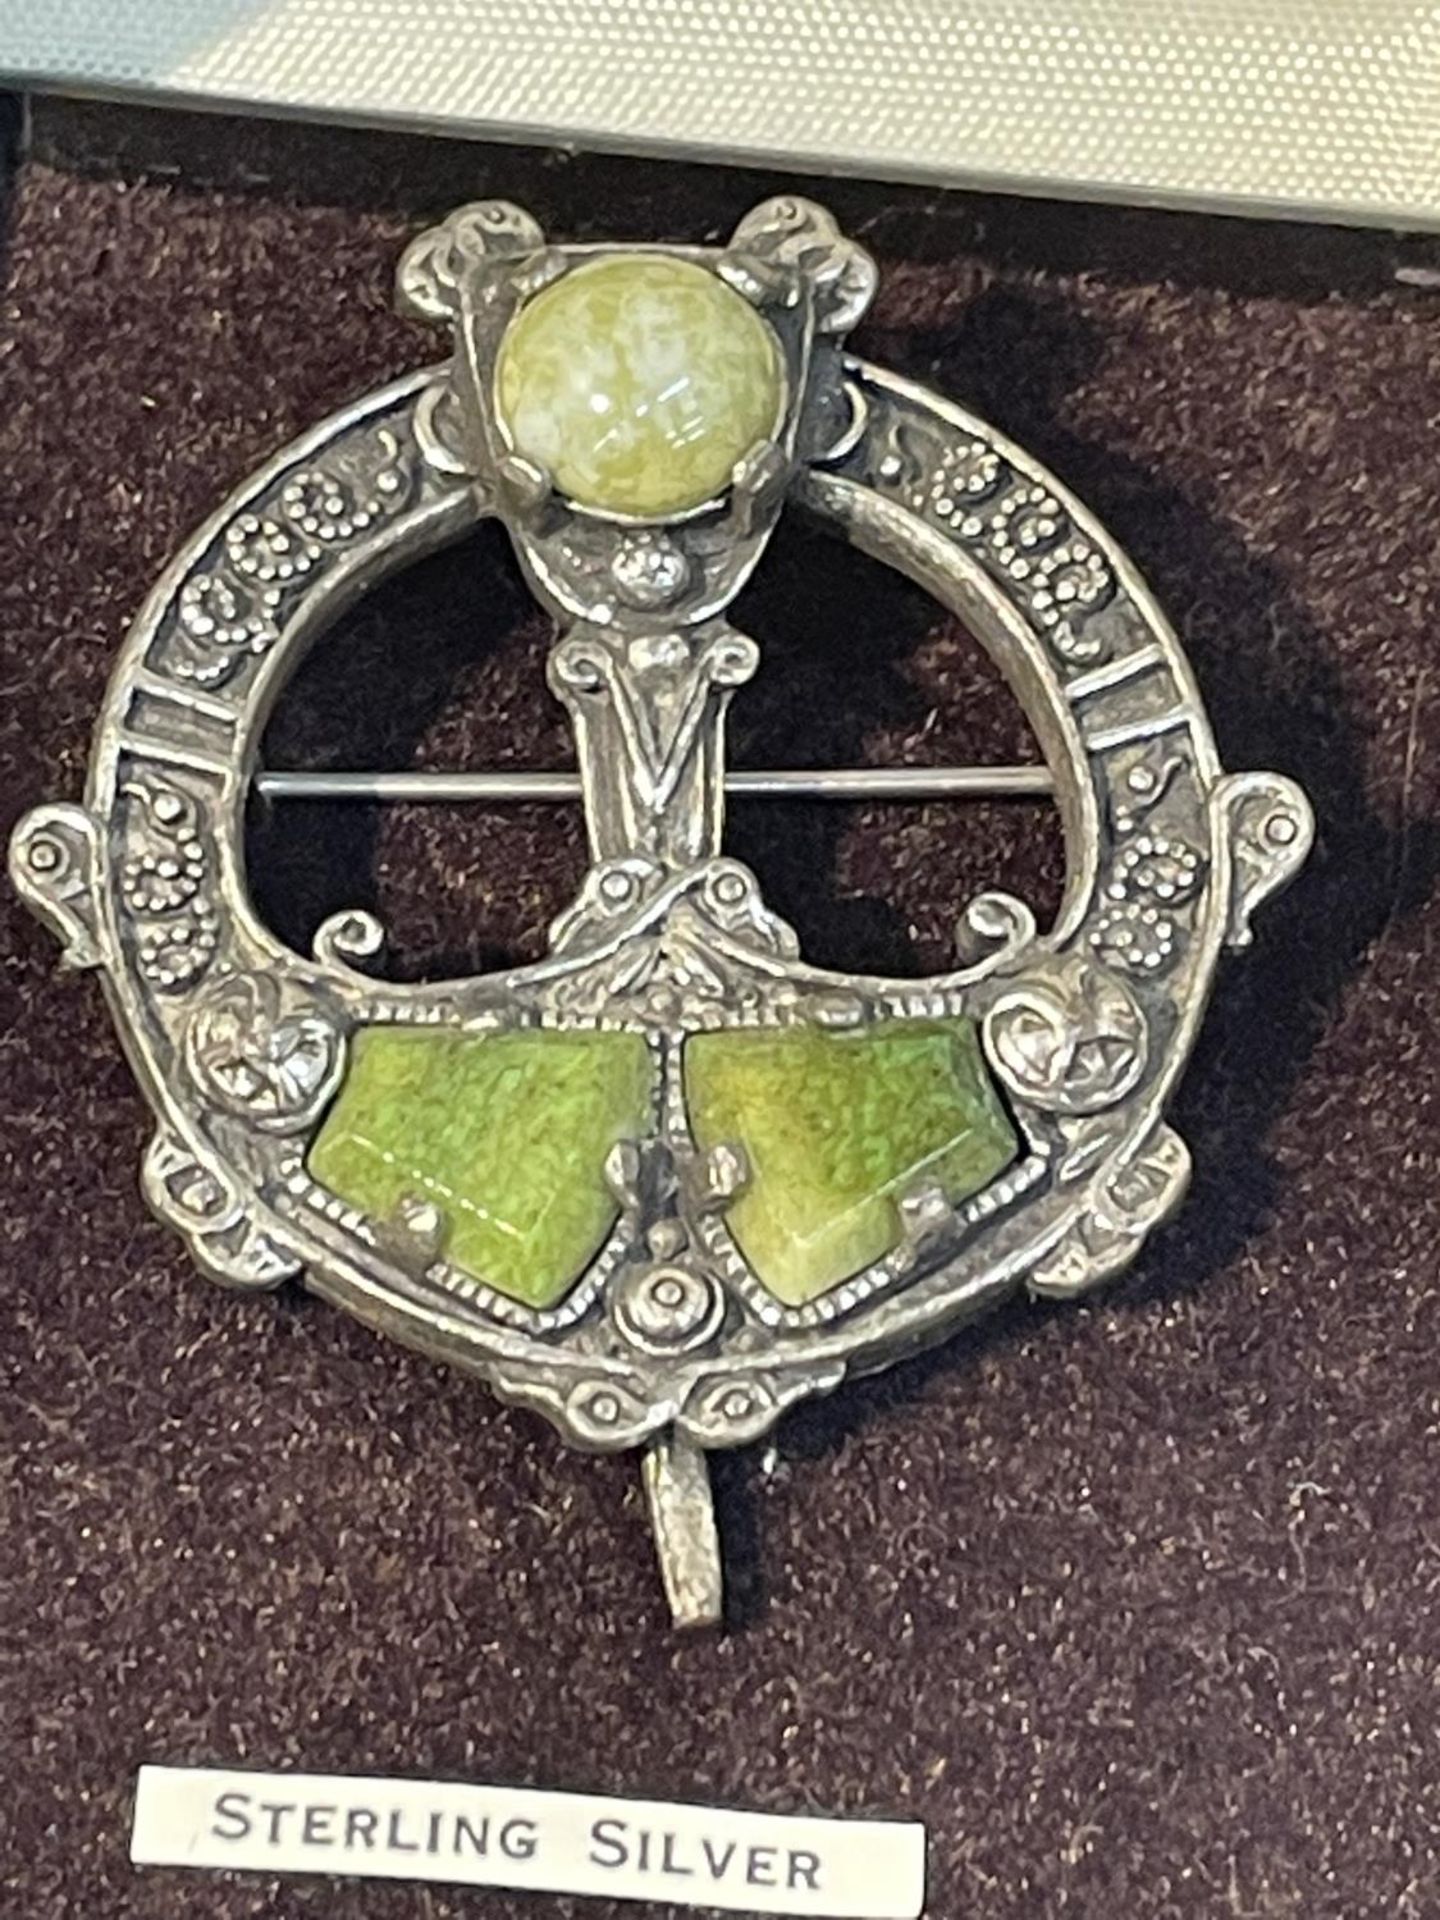 A CELTIC STYLE CLOAK PIN IN A PRESENTATION BOX - Image 2 of 3